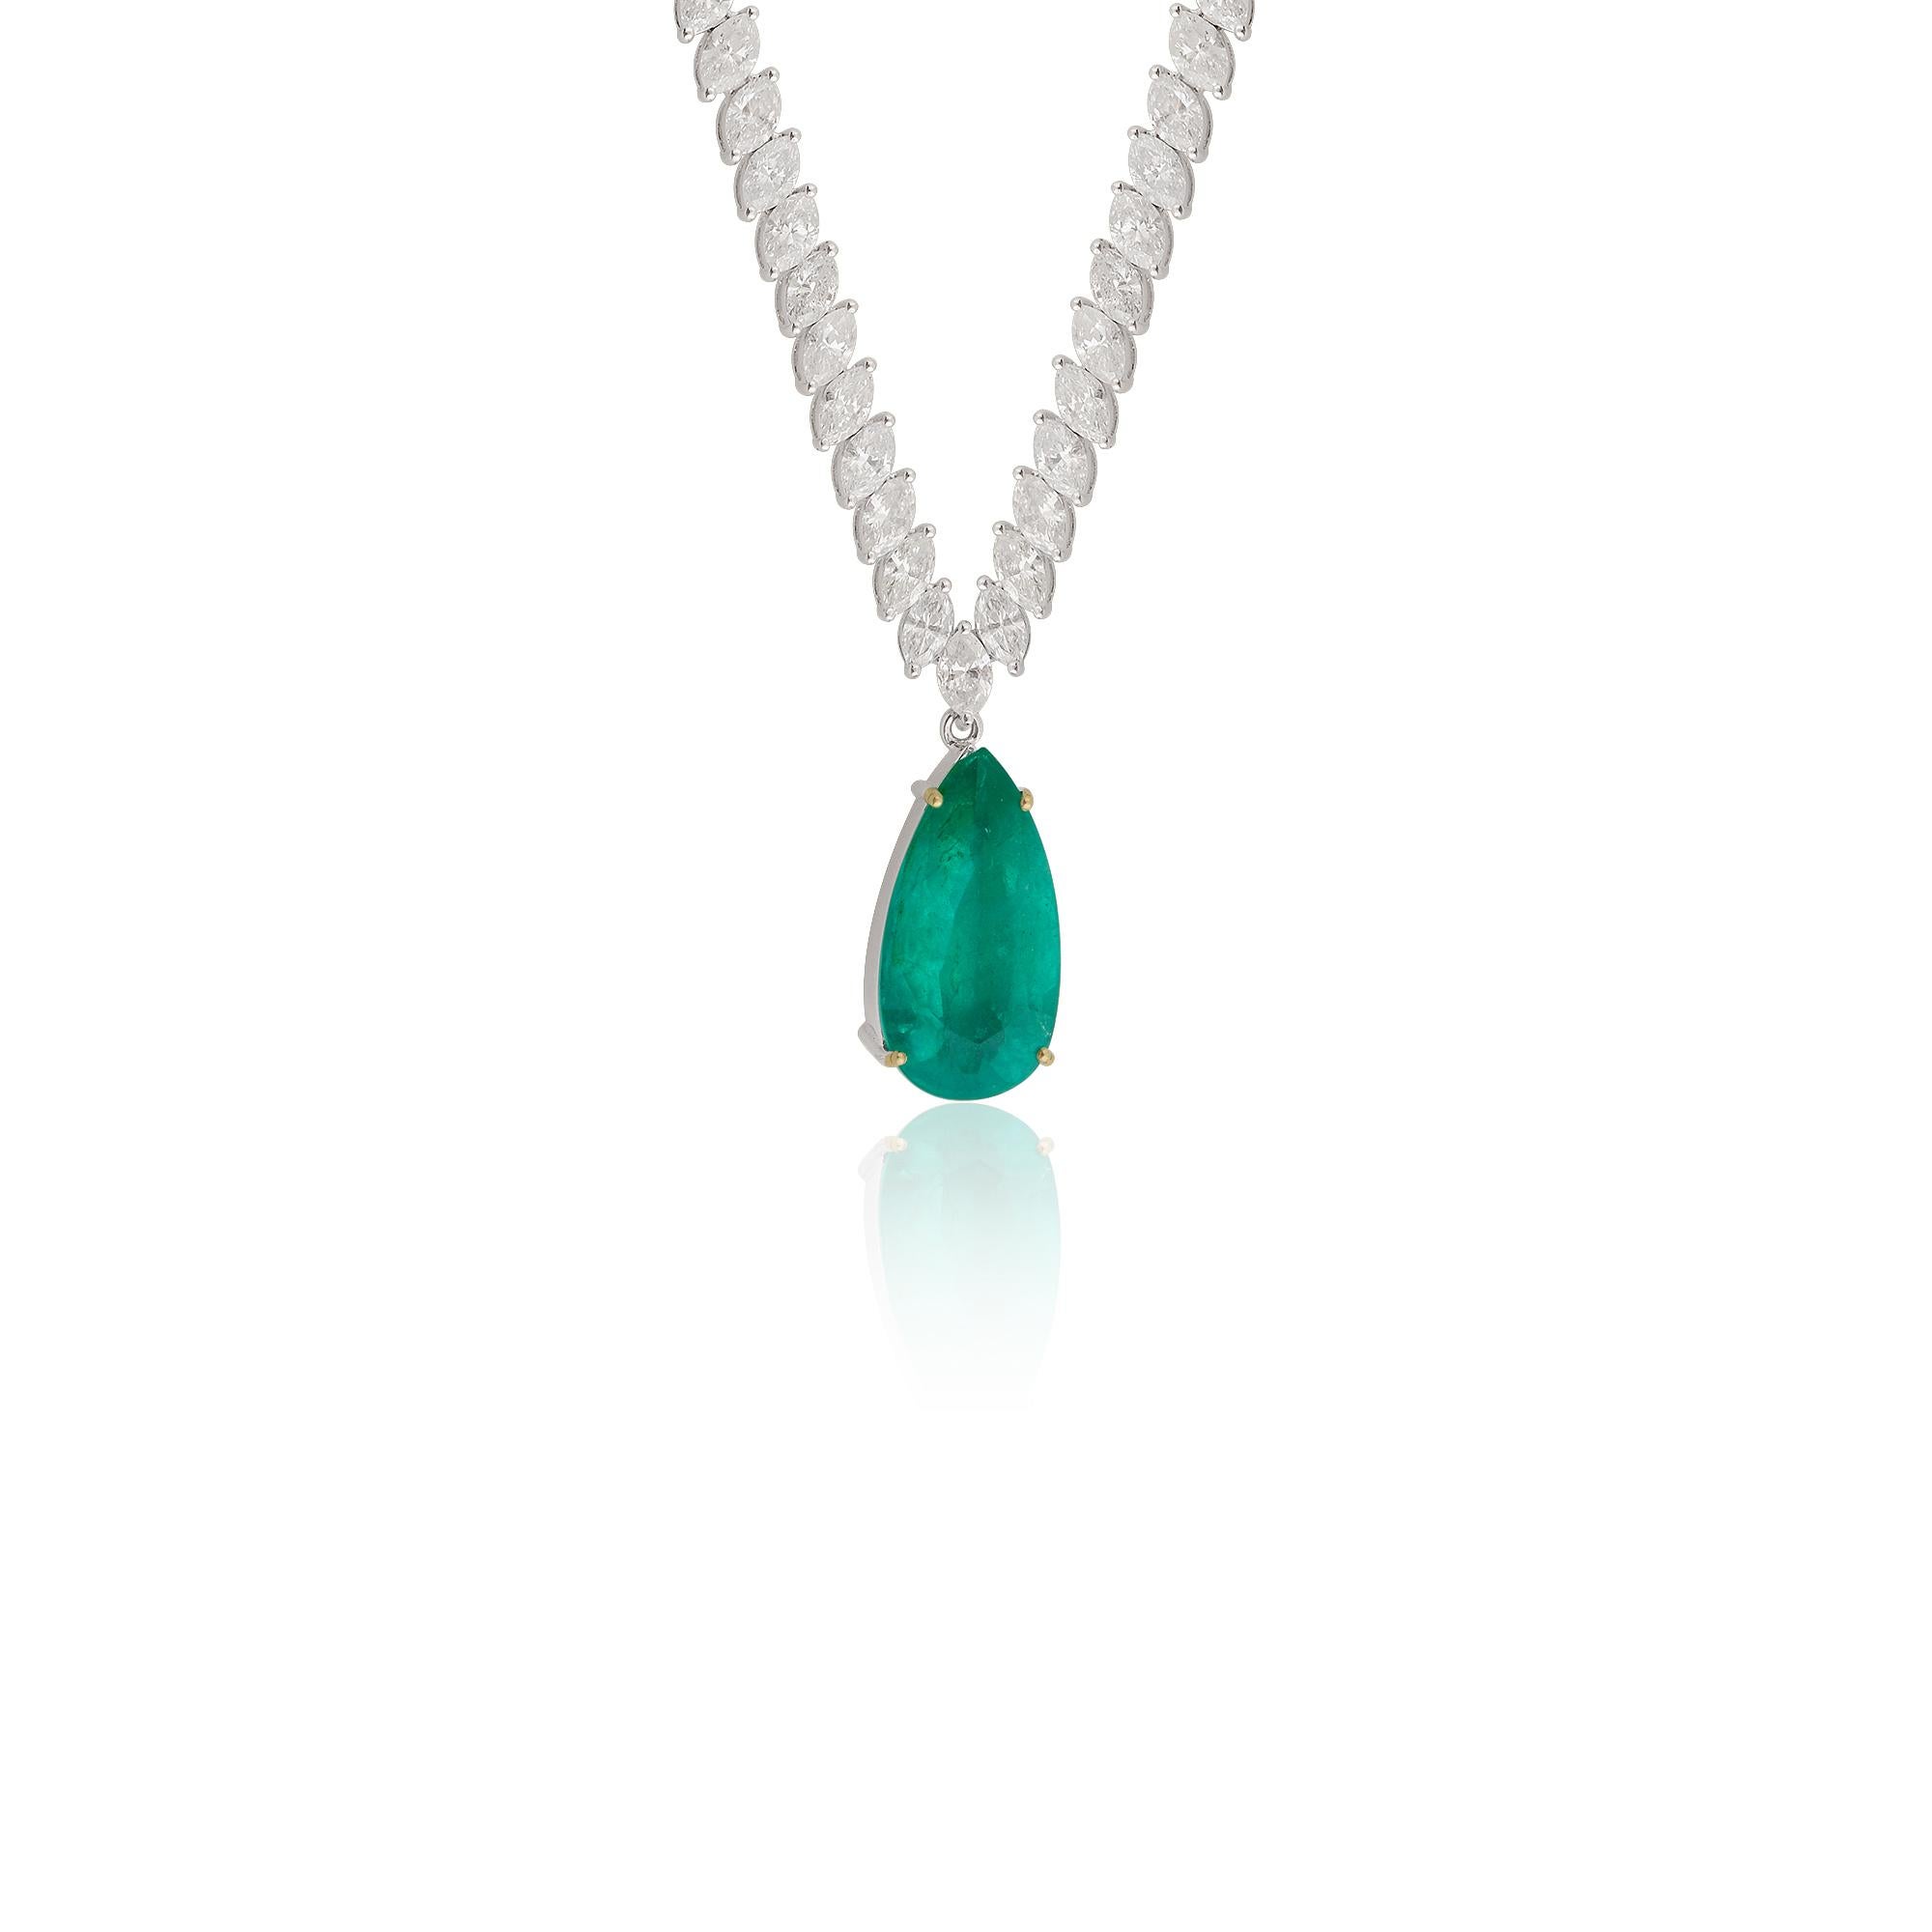 Pear Cut Zambian Emerald Gemstone Charm Necklace Marquise 18 Karat White Gold Jewelry For Sale